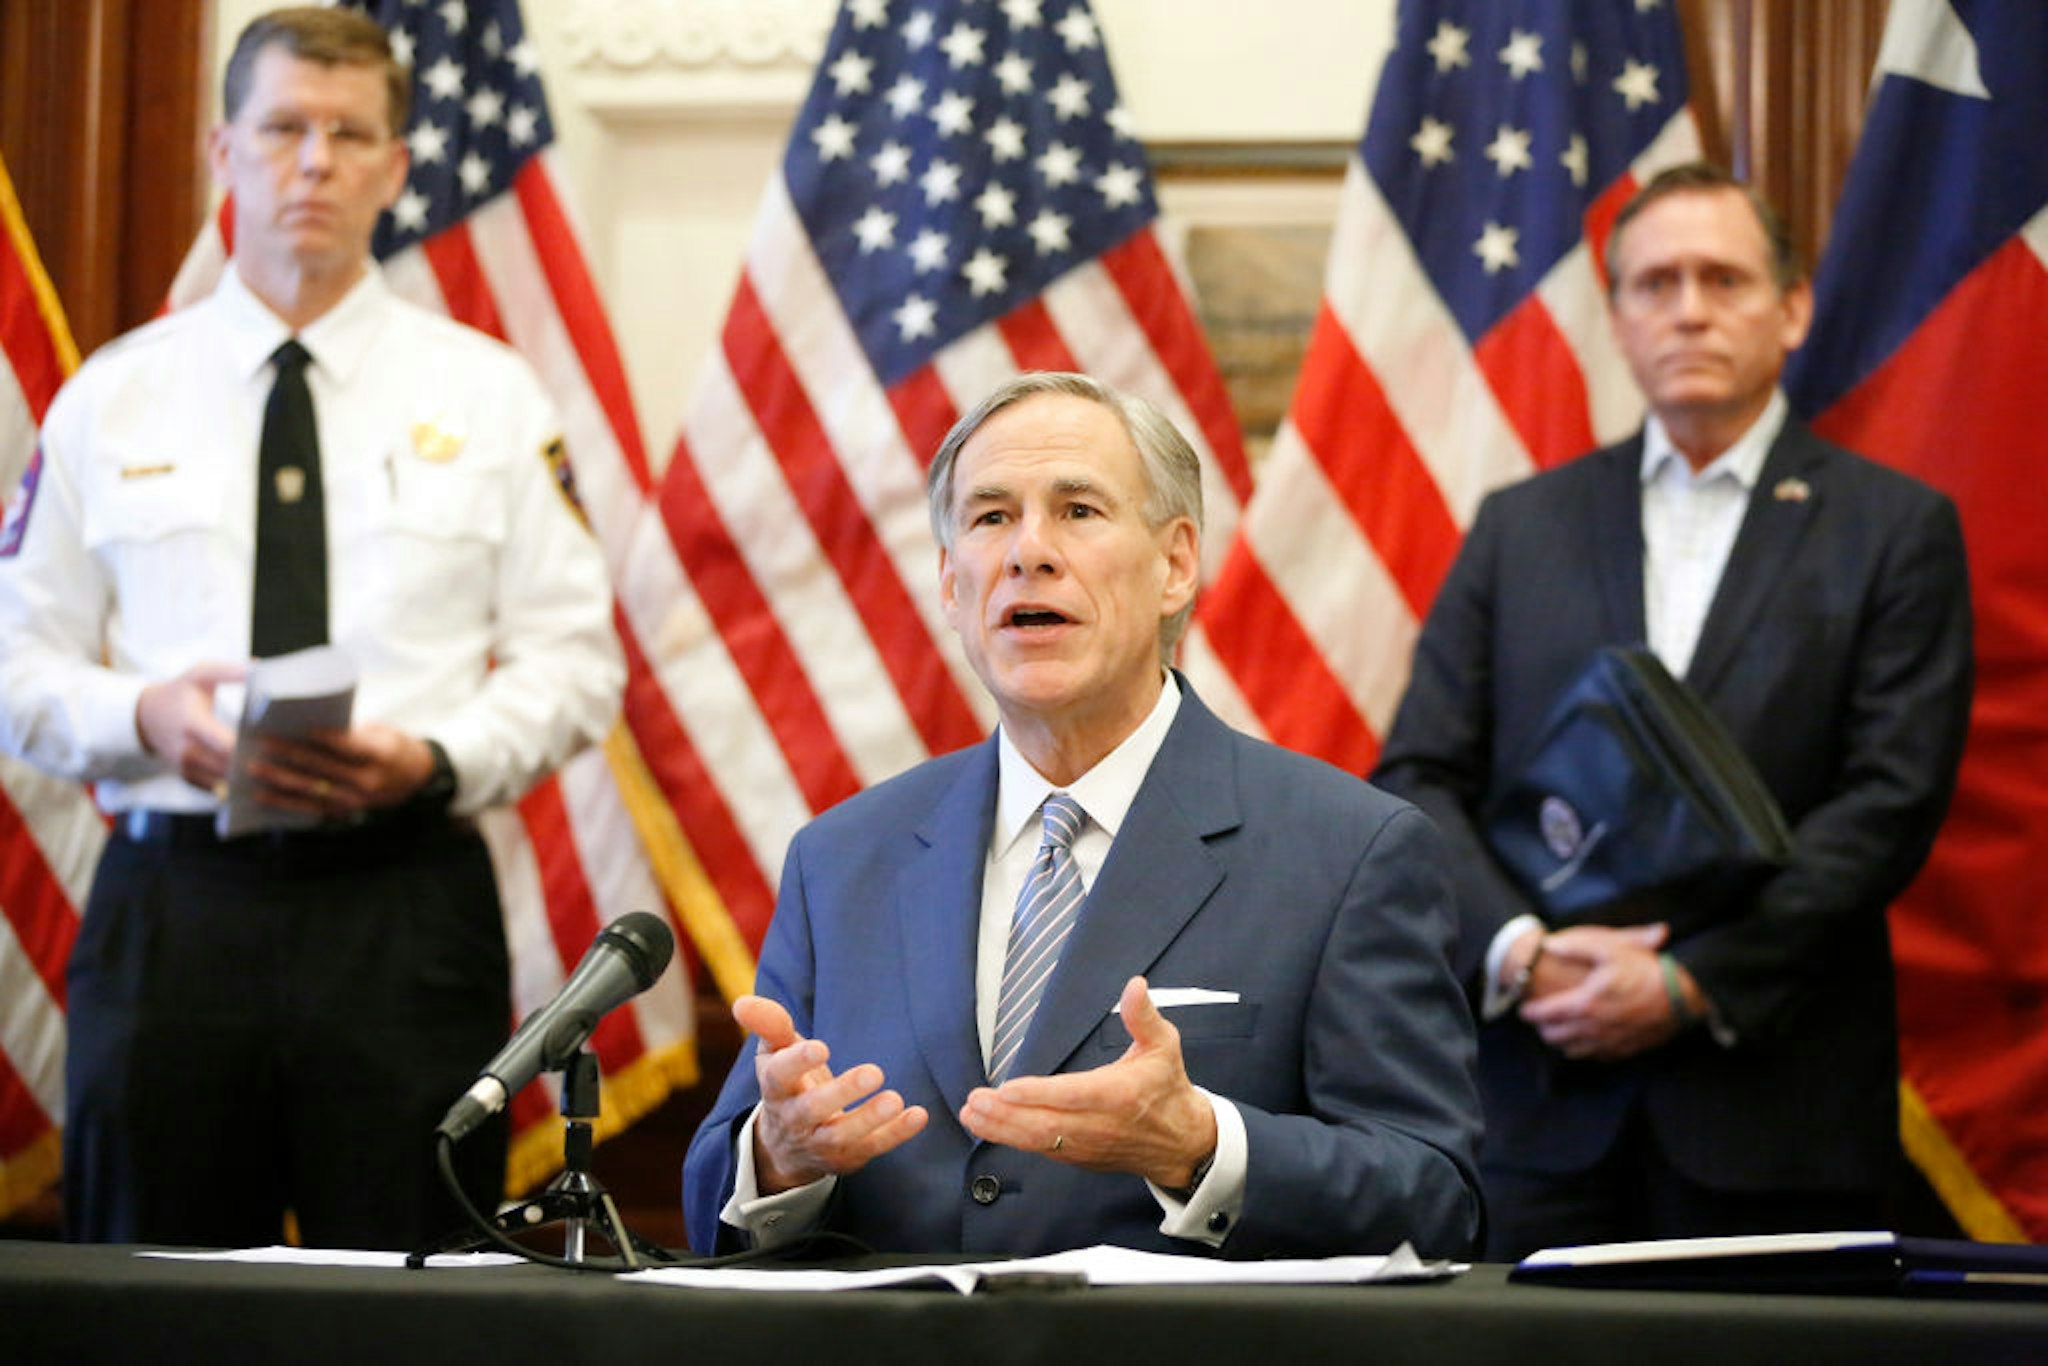 Texas Governor Greg Abbott announced the US Army Corps of Engineers and the state are putting up a 250-bed field hospital at the Kay Bailey Hutchison Convention Center in downtown Dallas during a press conference at the Texas State Capitol in Austin, Sunday, March 29, 2020.